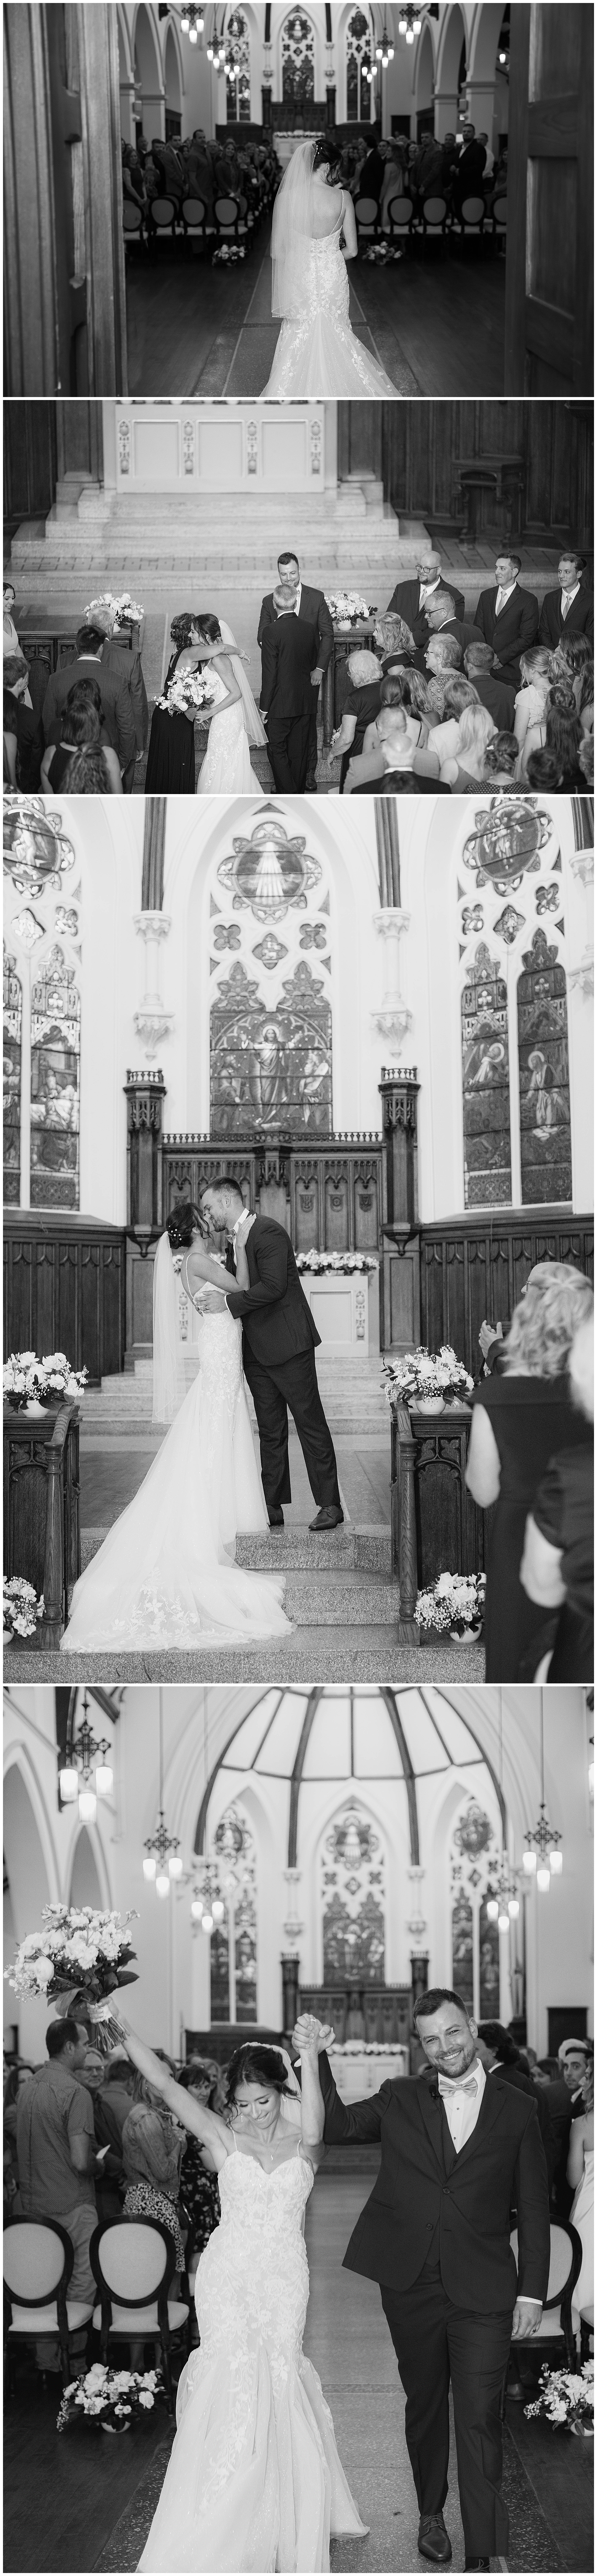 Wedding Ceremony at The Abbey at St James